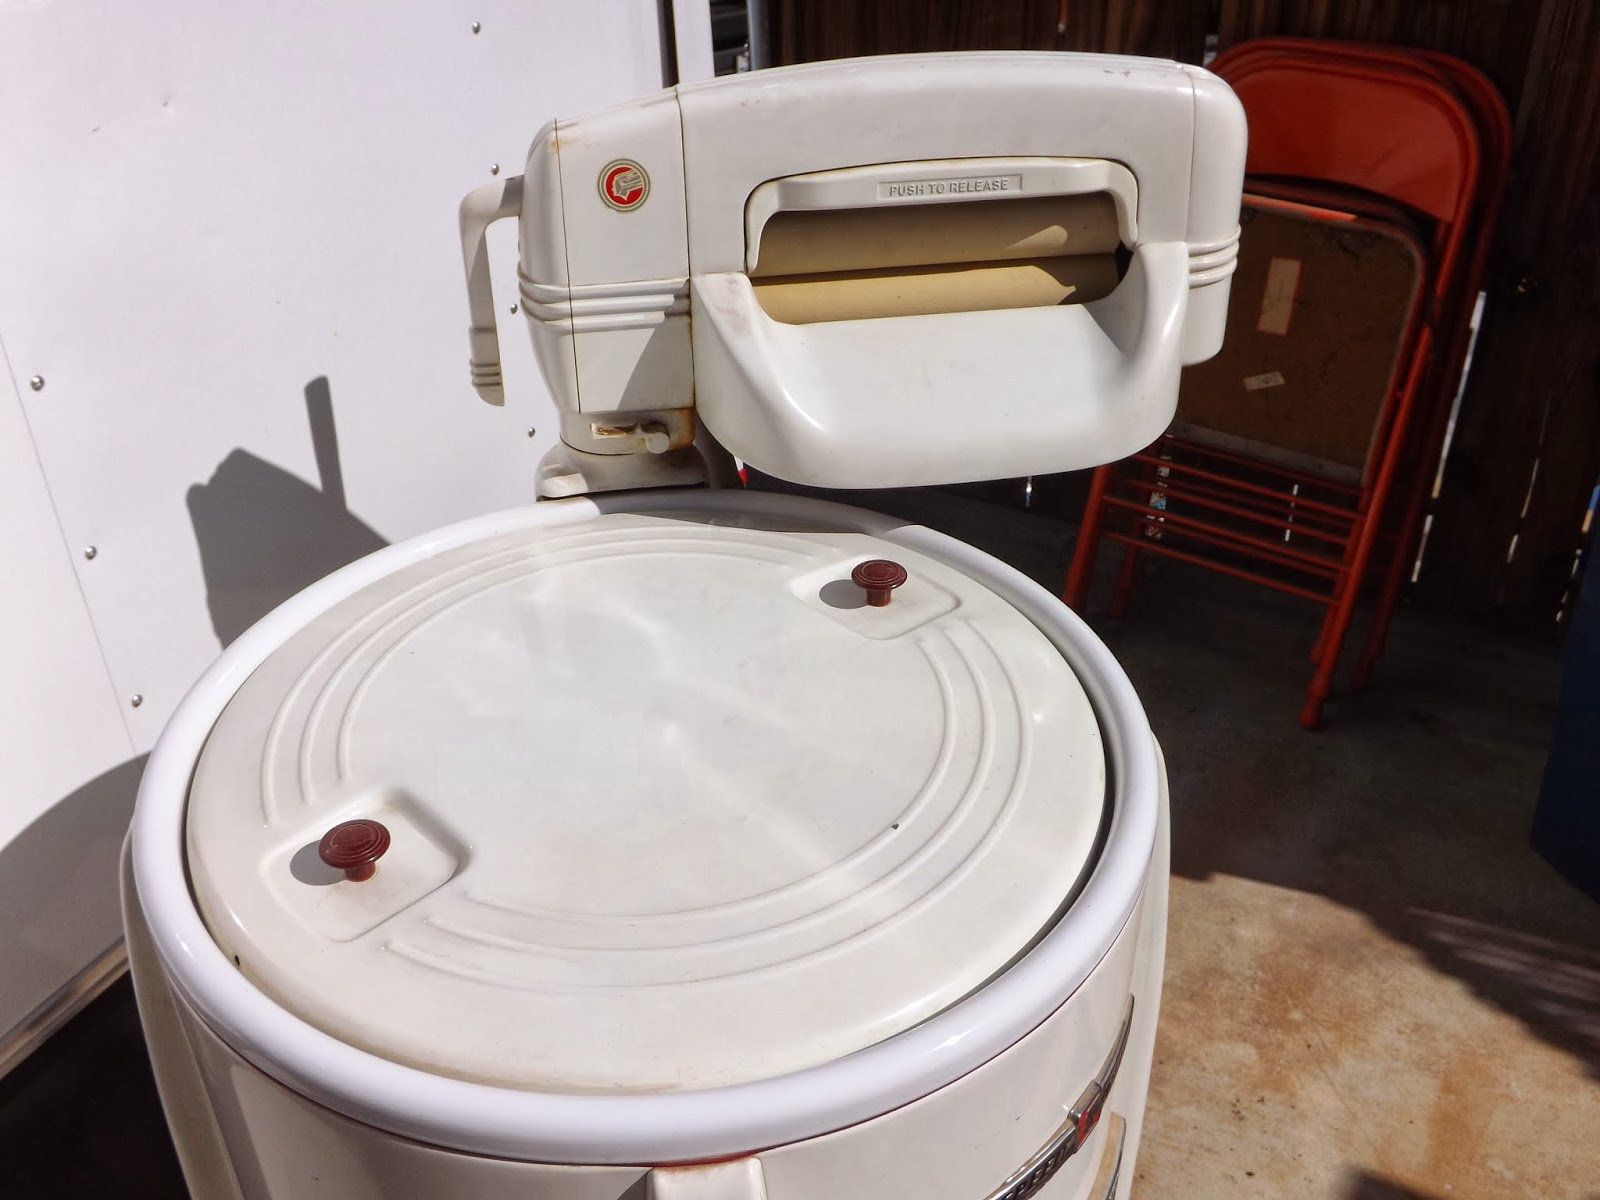 selling excess Vintage Speed Queen Deluxe Wringer washing machine.